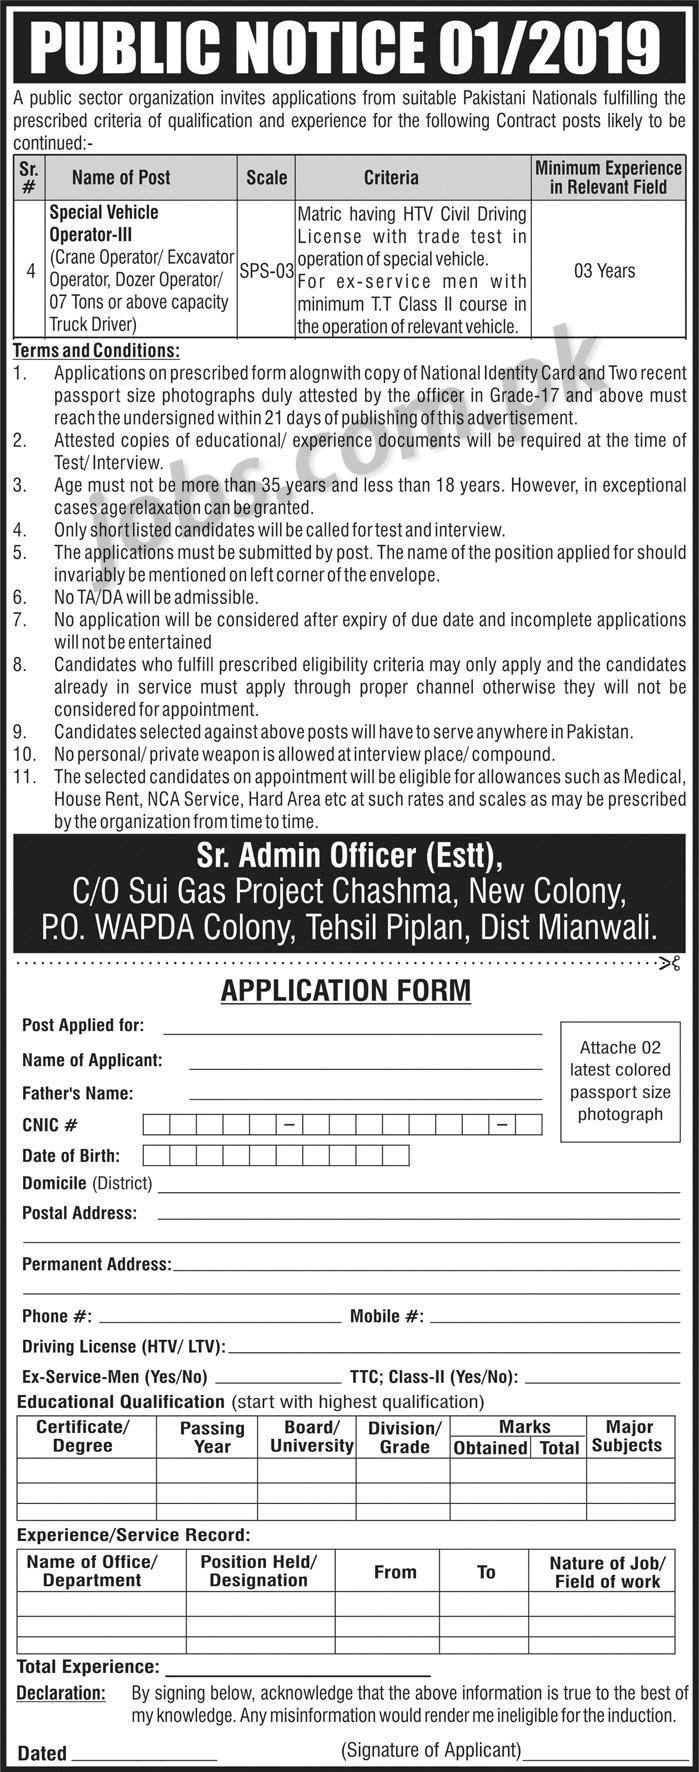 PAEC Jobs 2019 for Special Vehicle Operator-III